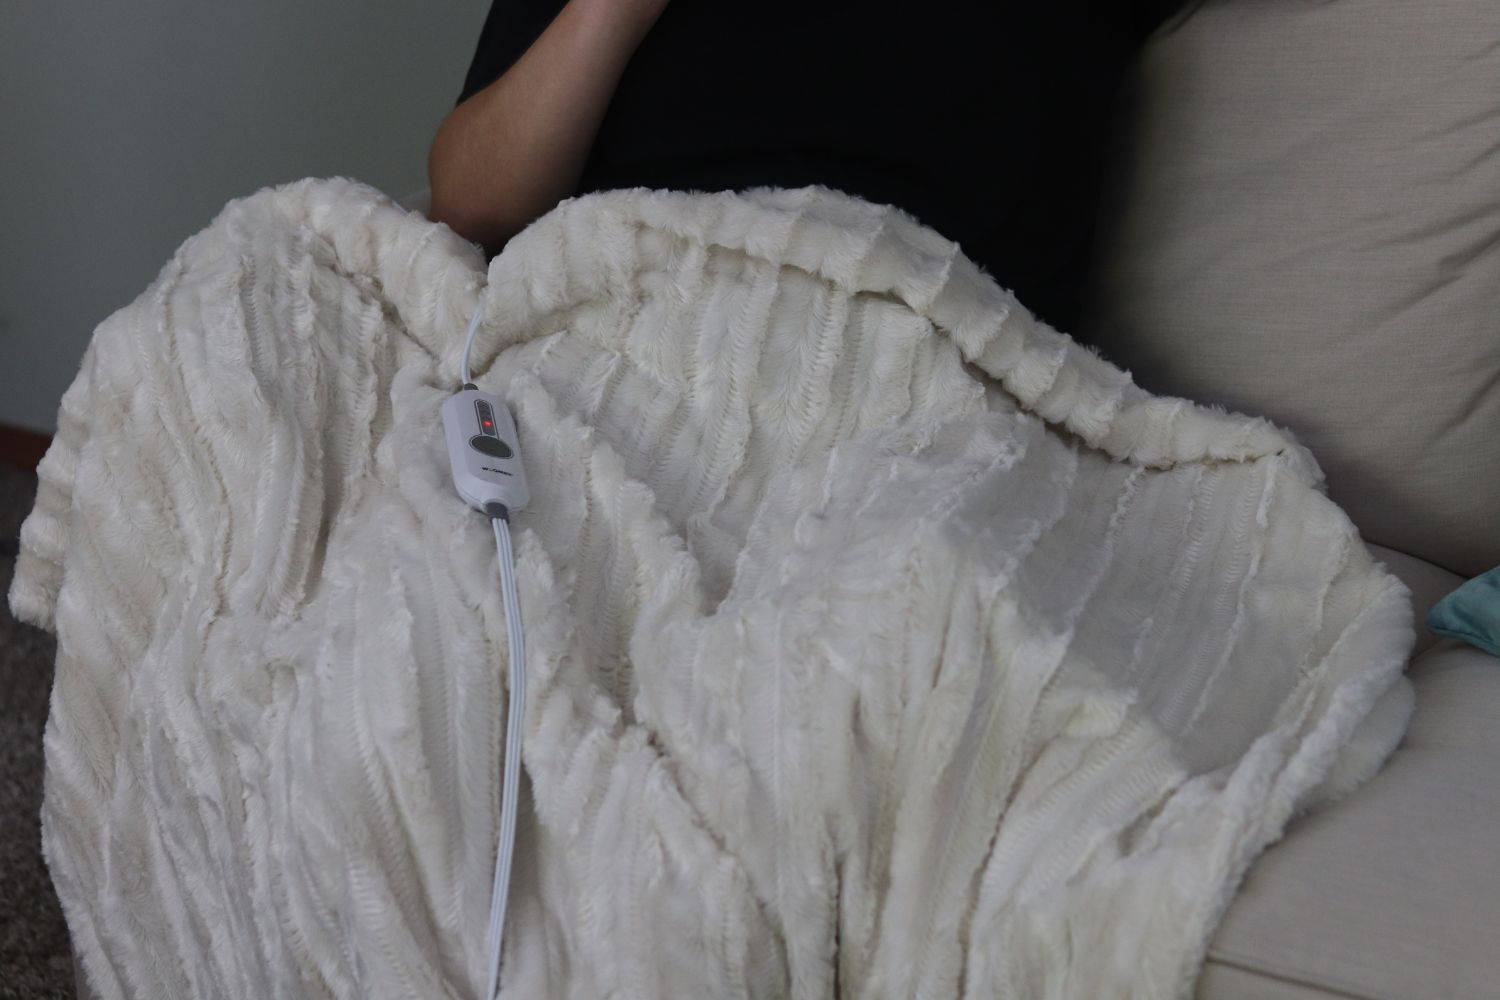 A soft-looking electric blanket and its controller on a person's lap.